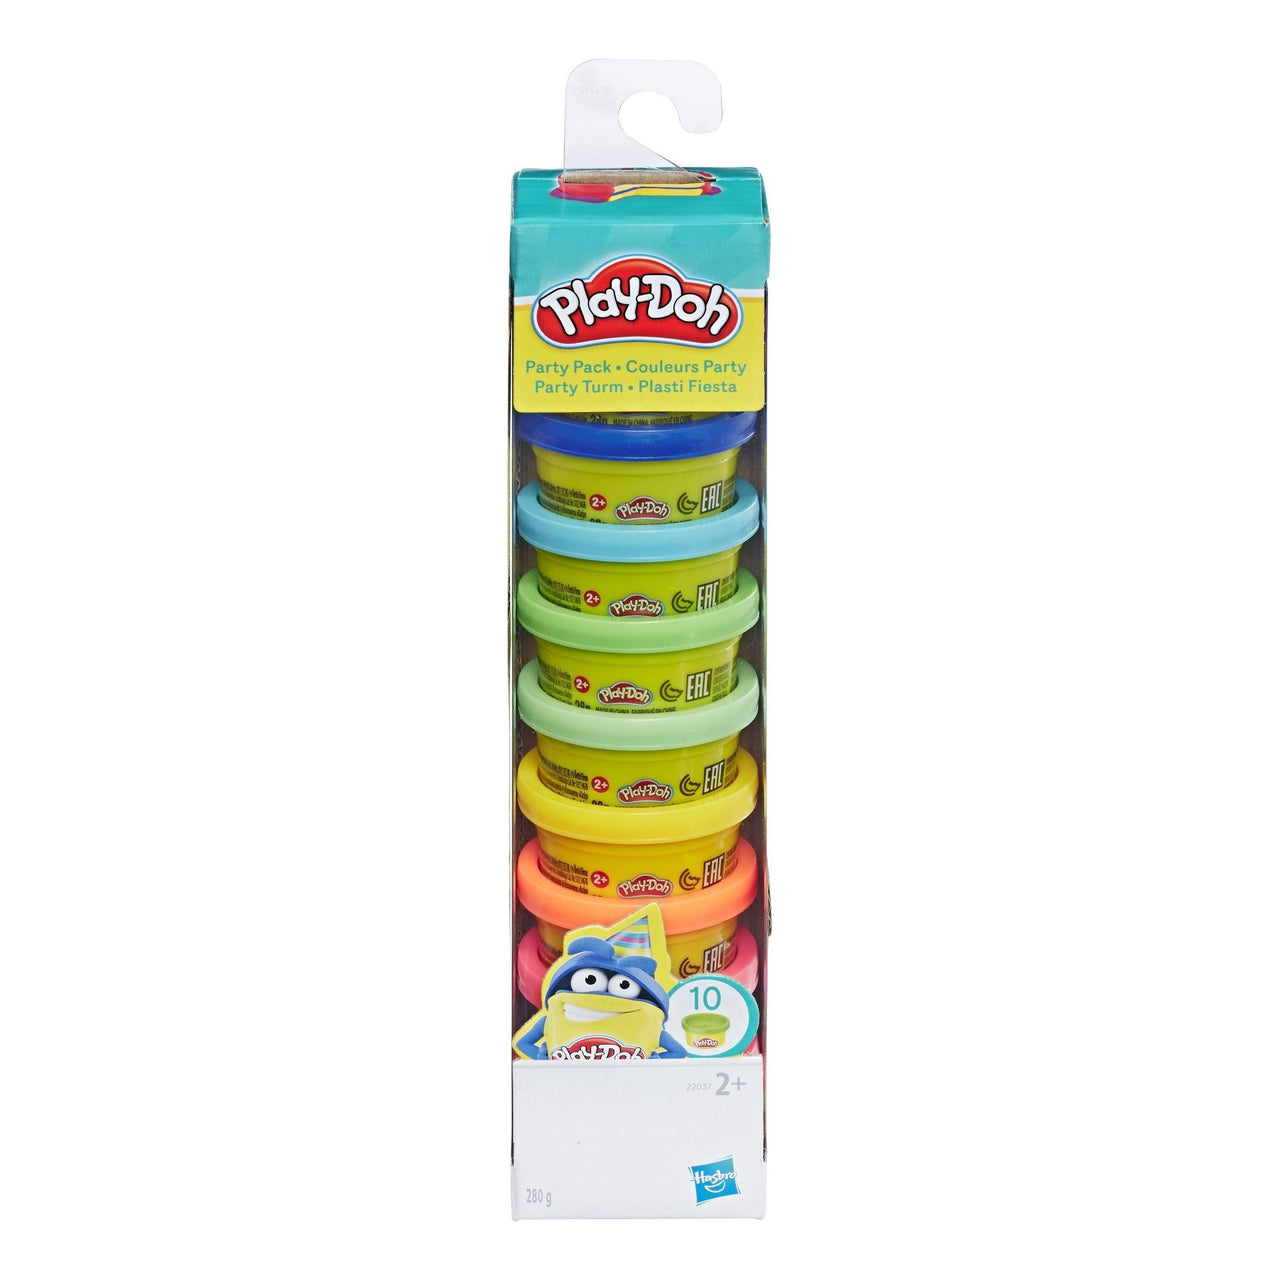 Play-Doh Party Pack in a Tube 10 Colours Play-Doh